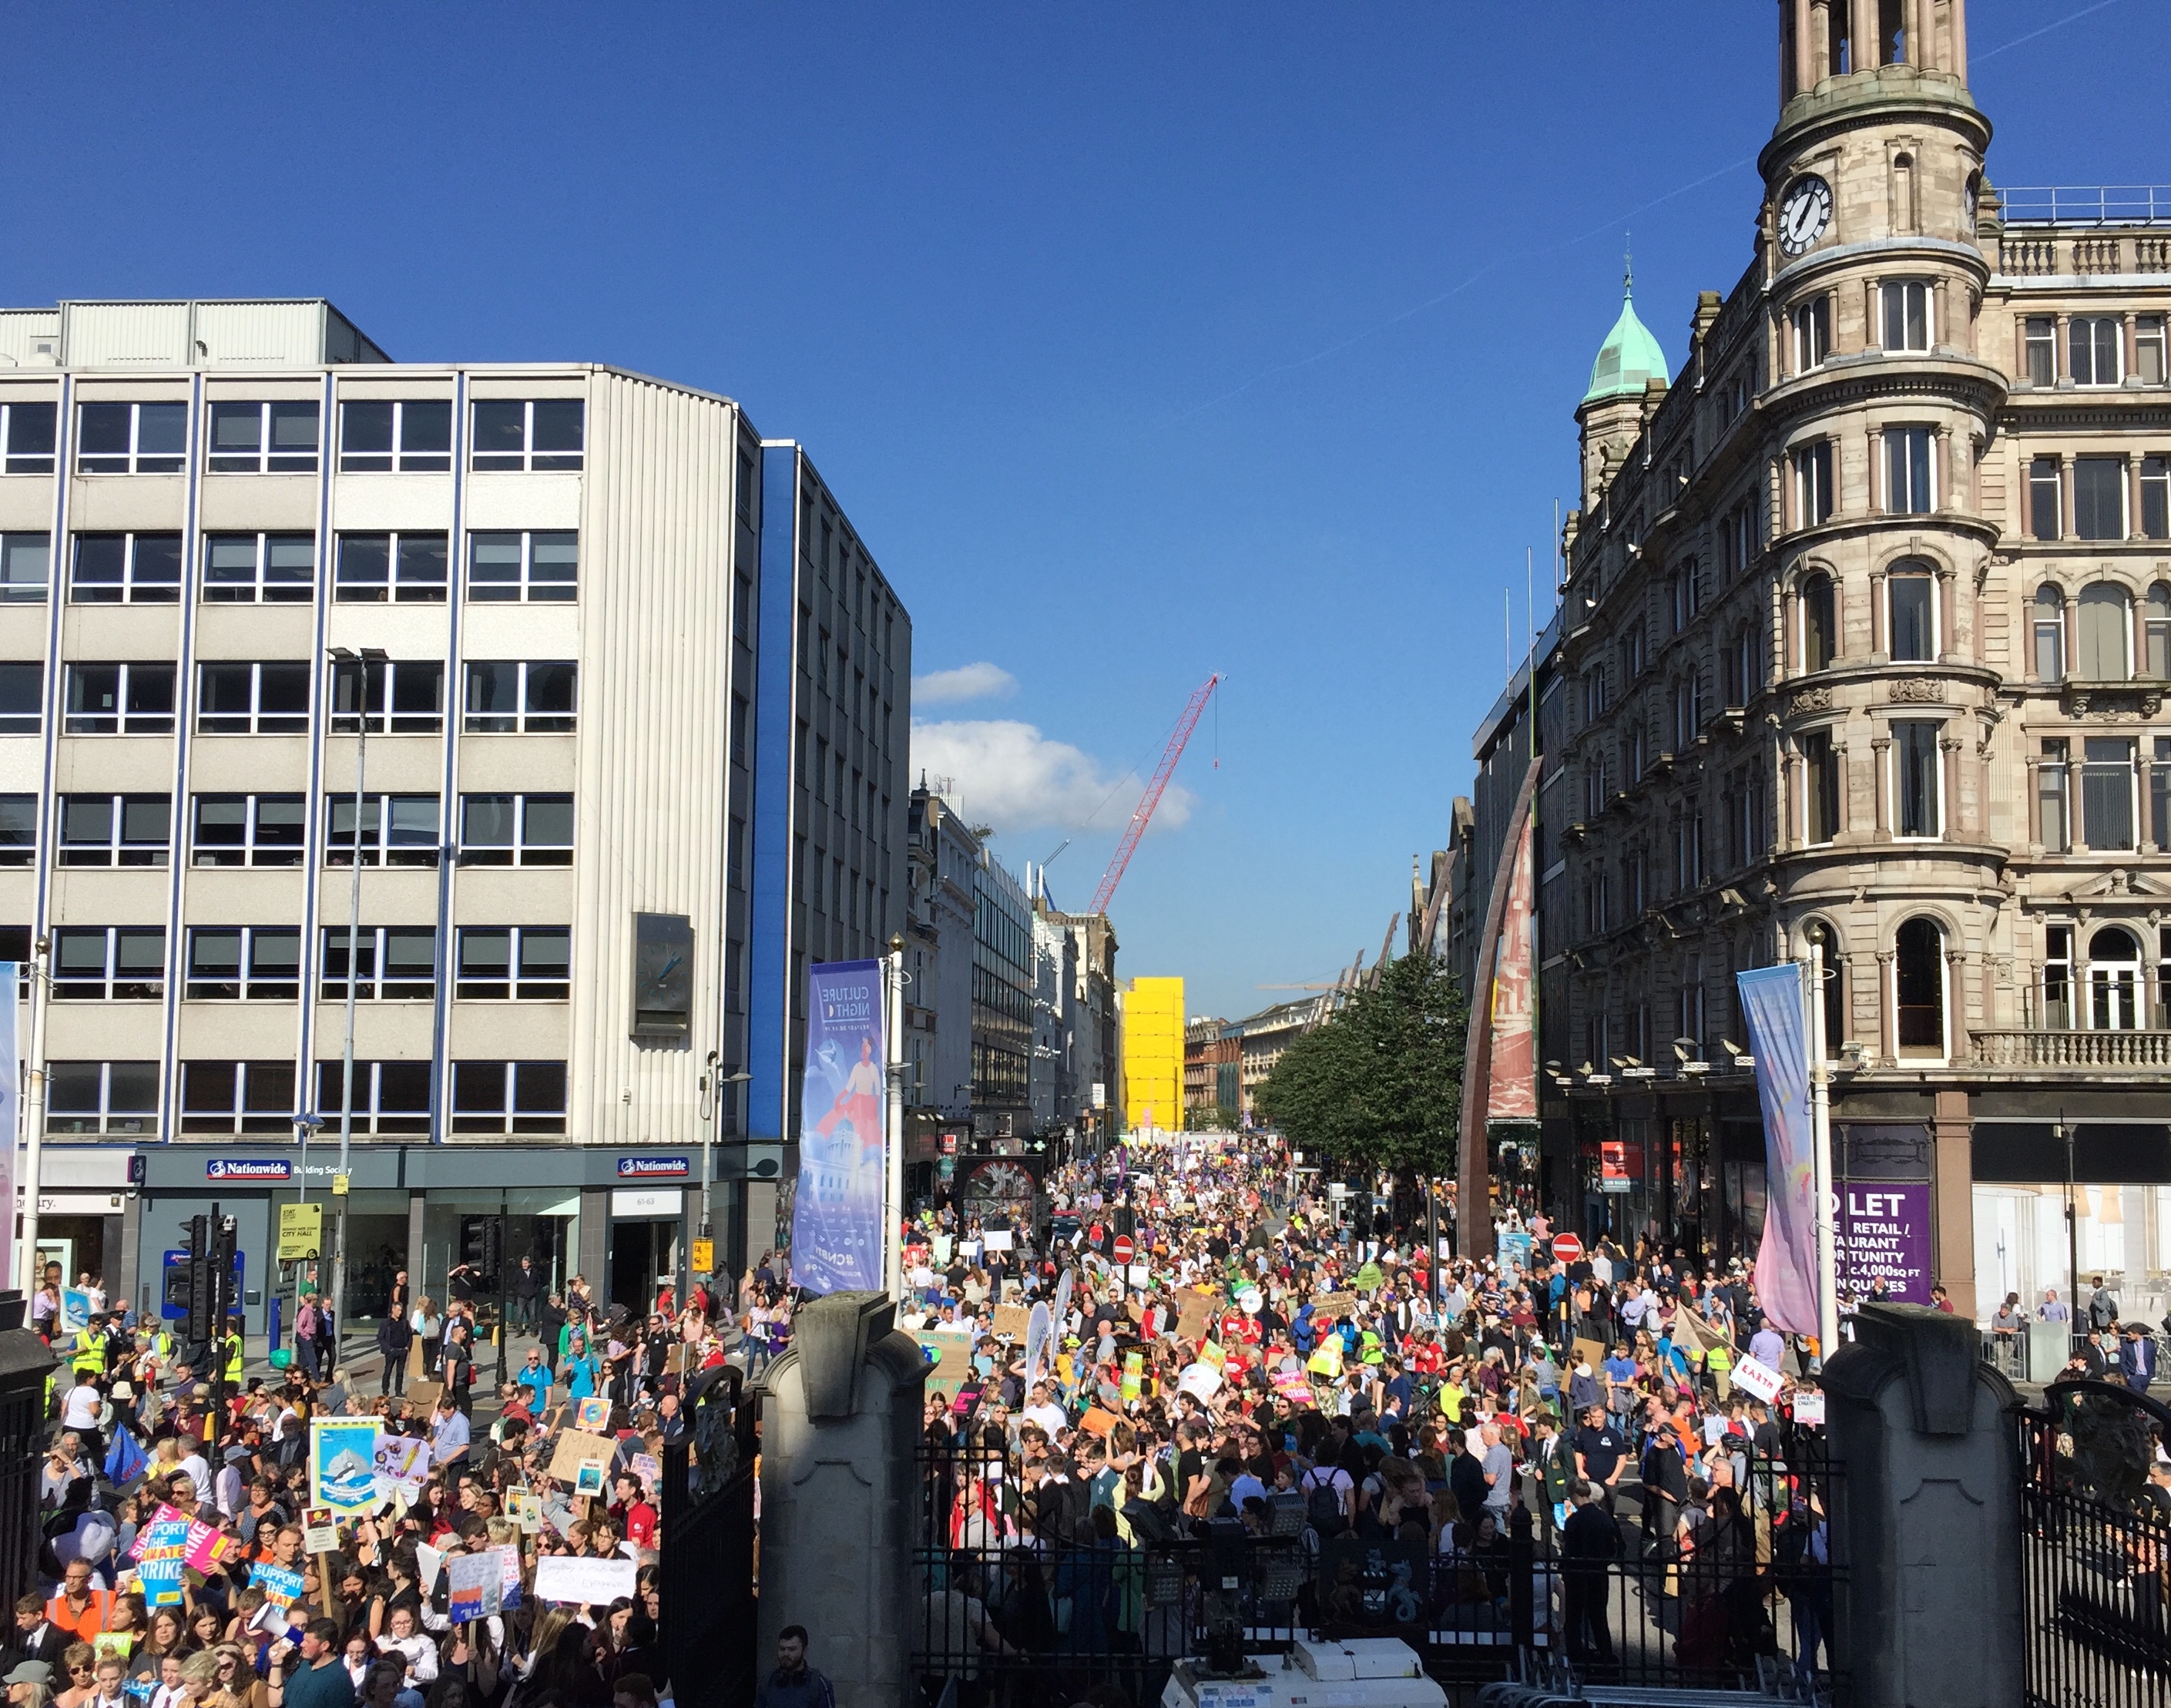 Huge crowds descended on City Hall in Belfast for the Climate Strike rally